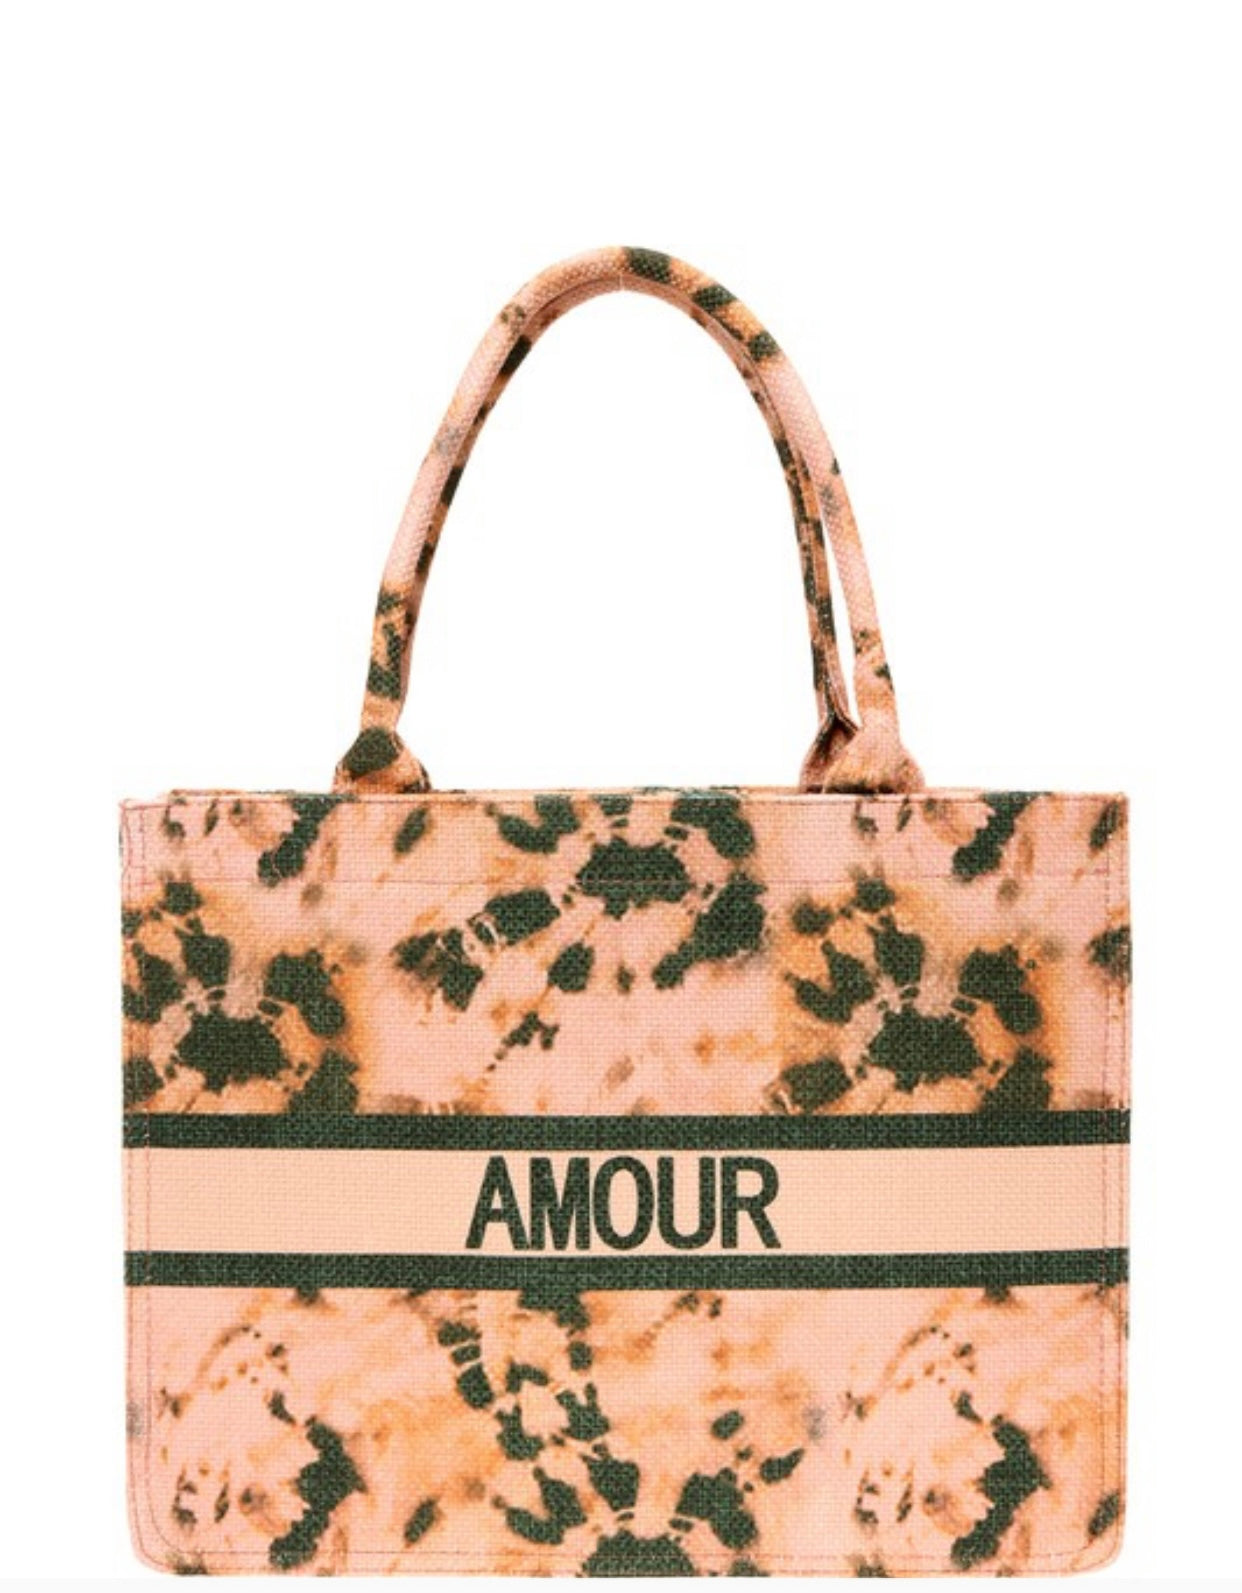 "Amour" Tote Bag